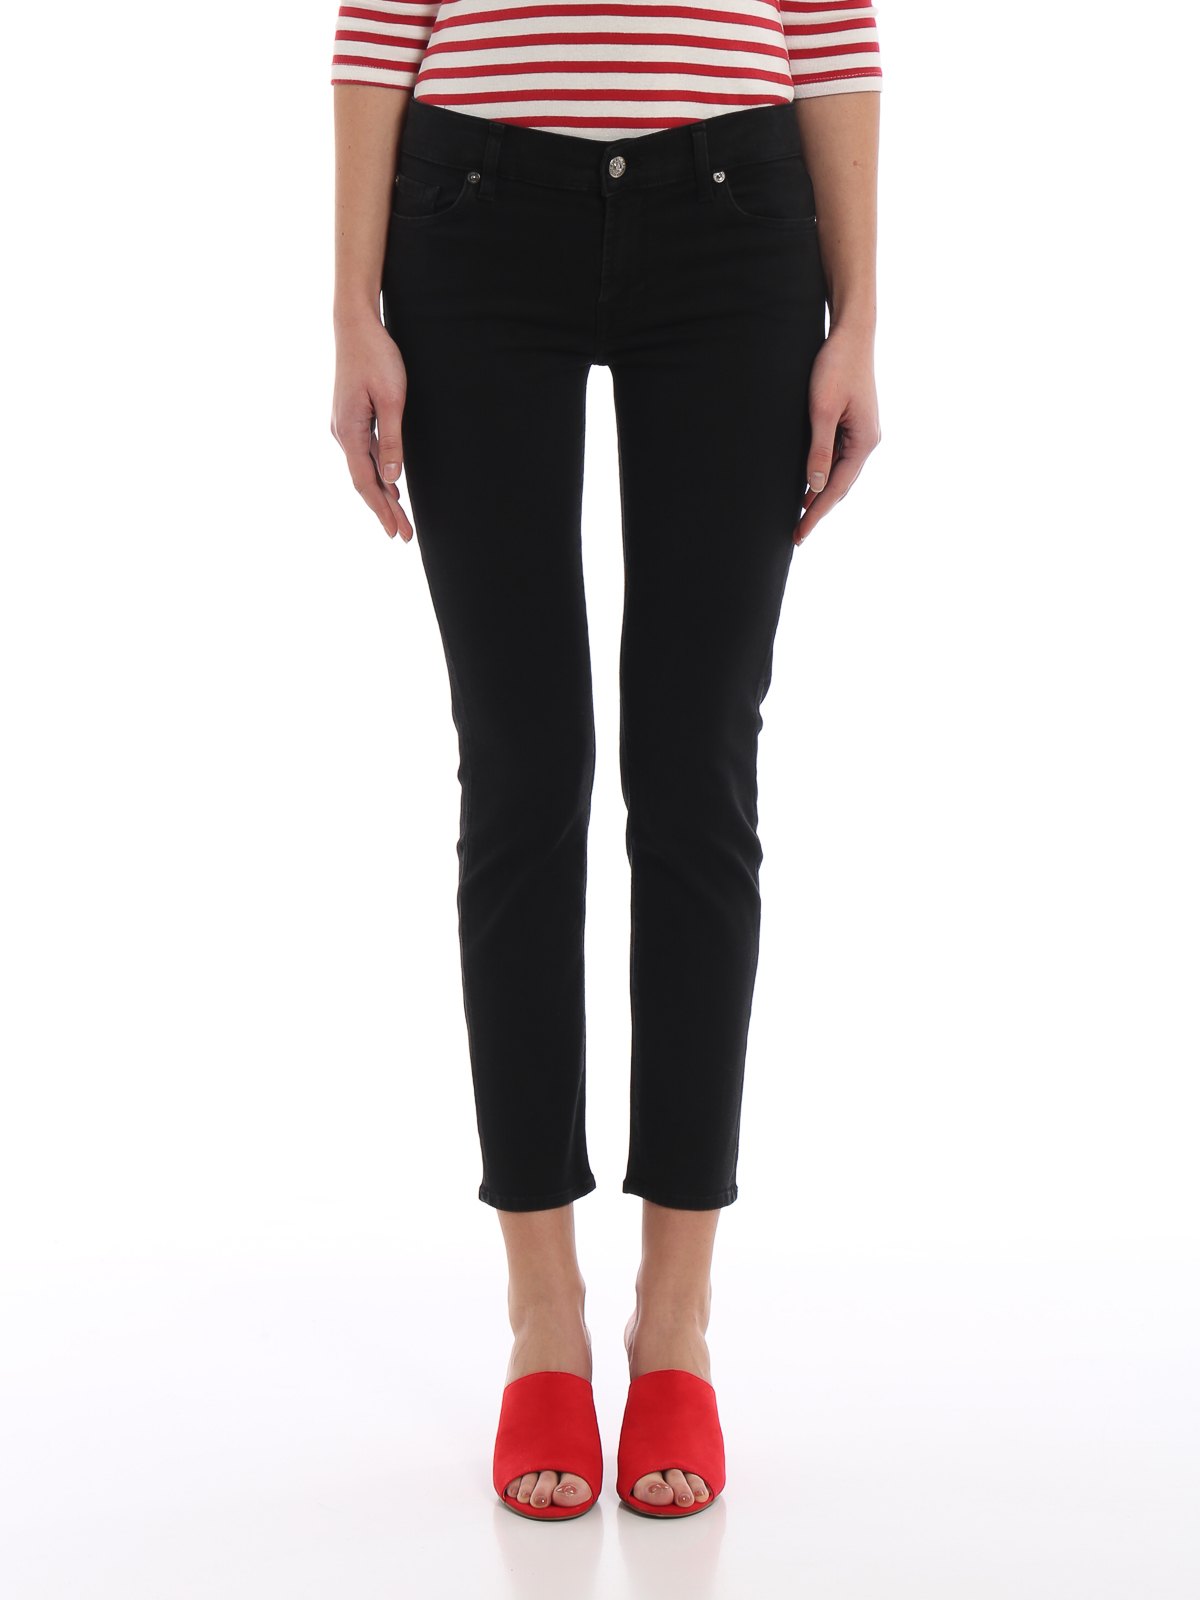 7 for all mankind roxanne crop